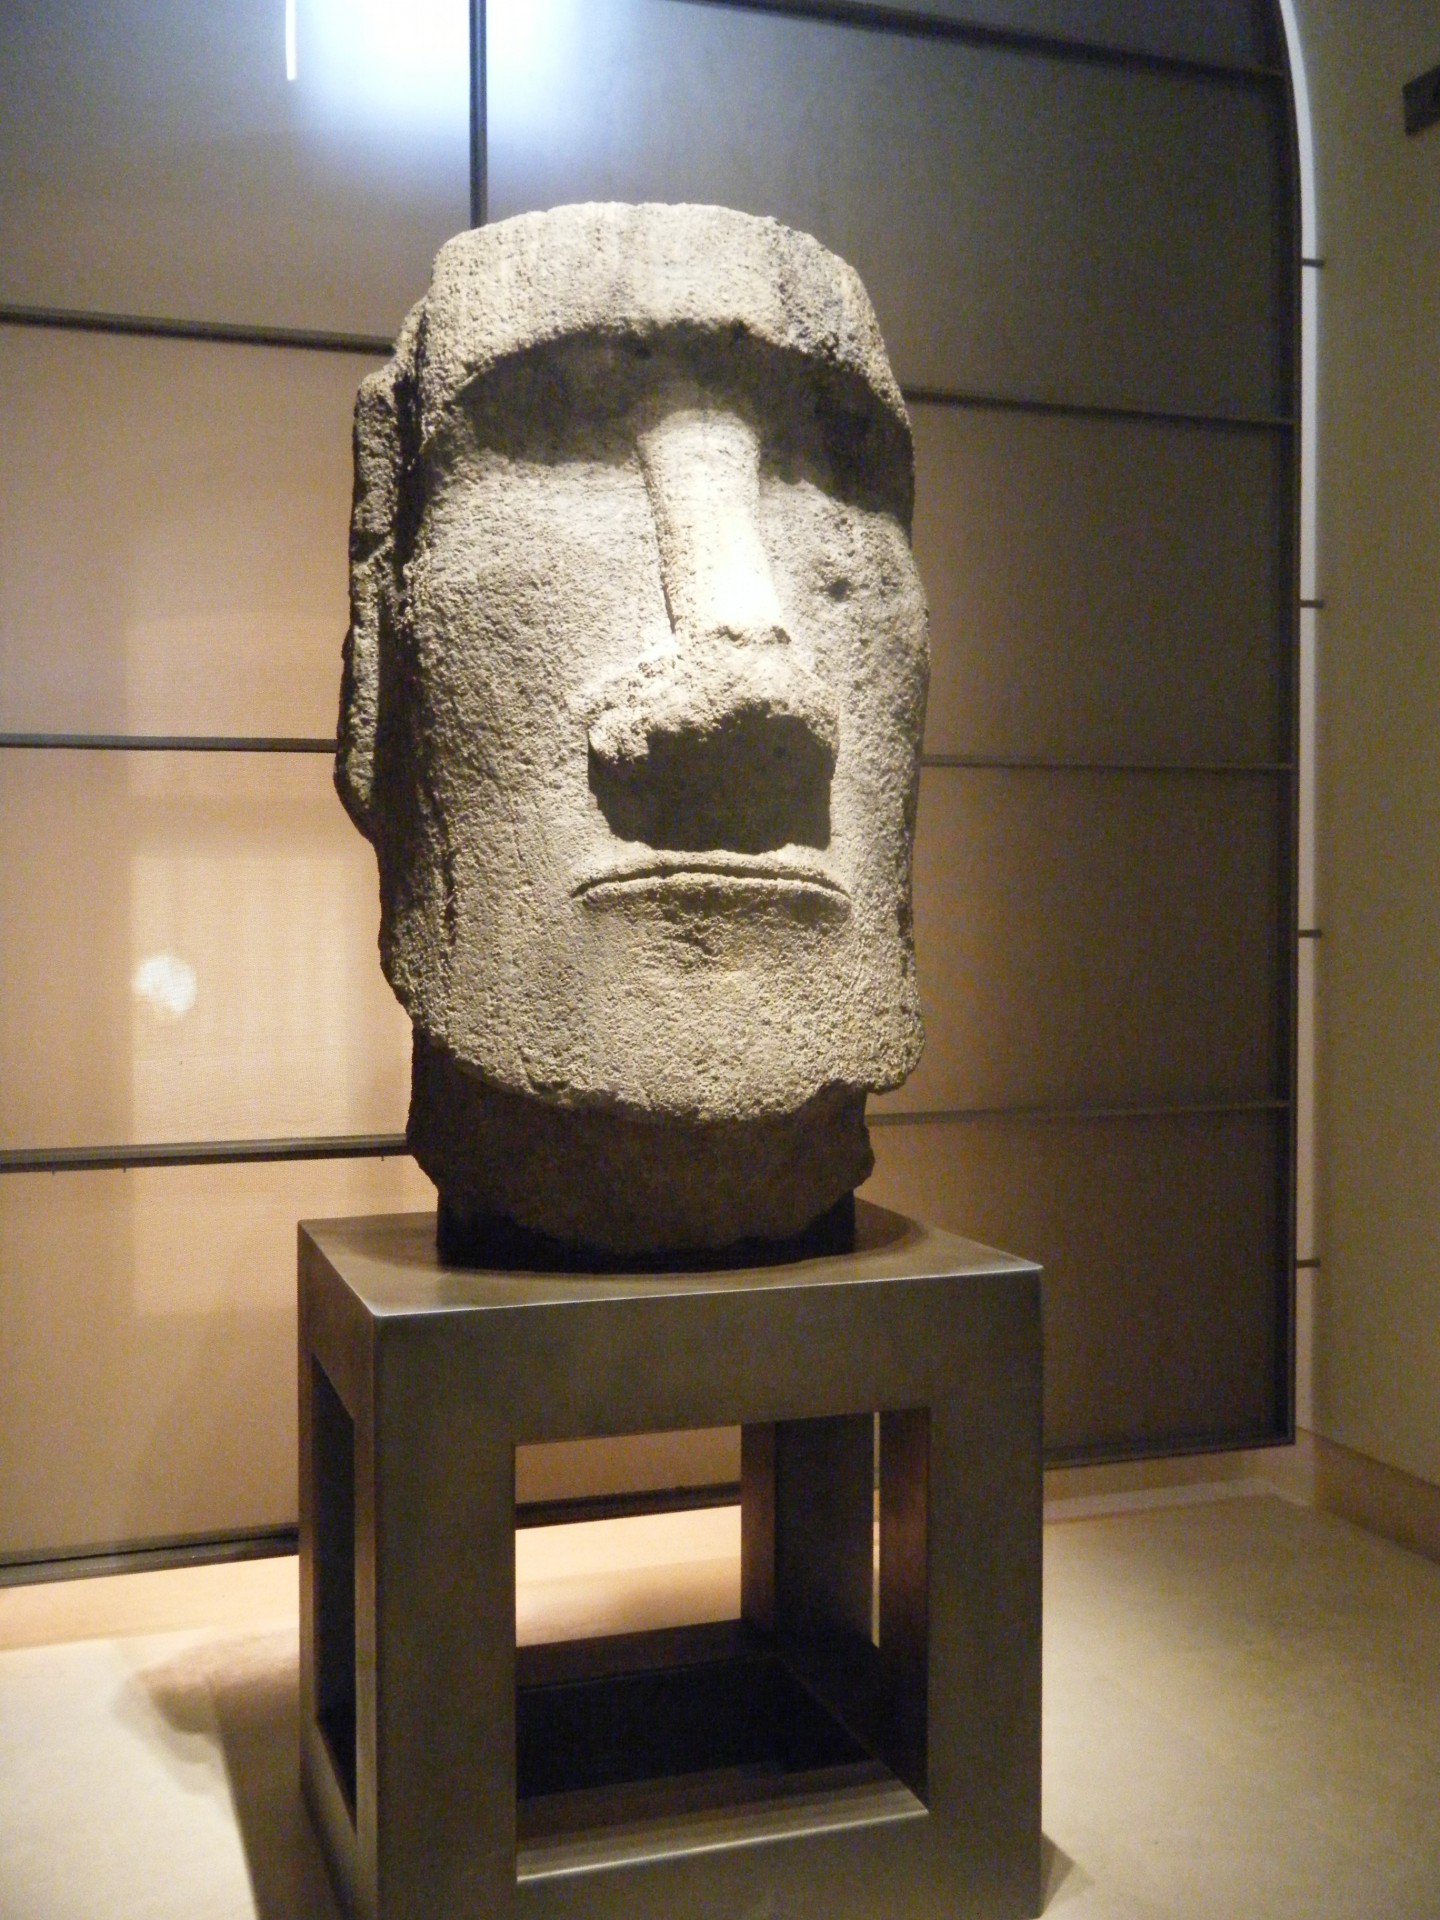 Easter Island statue in The Louvre